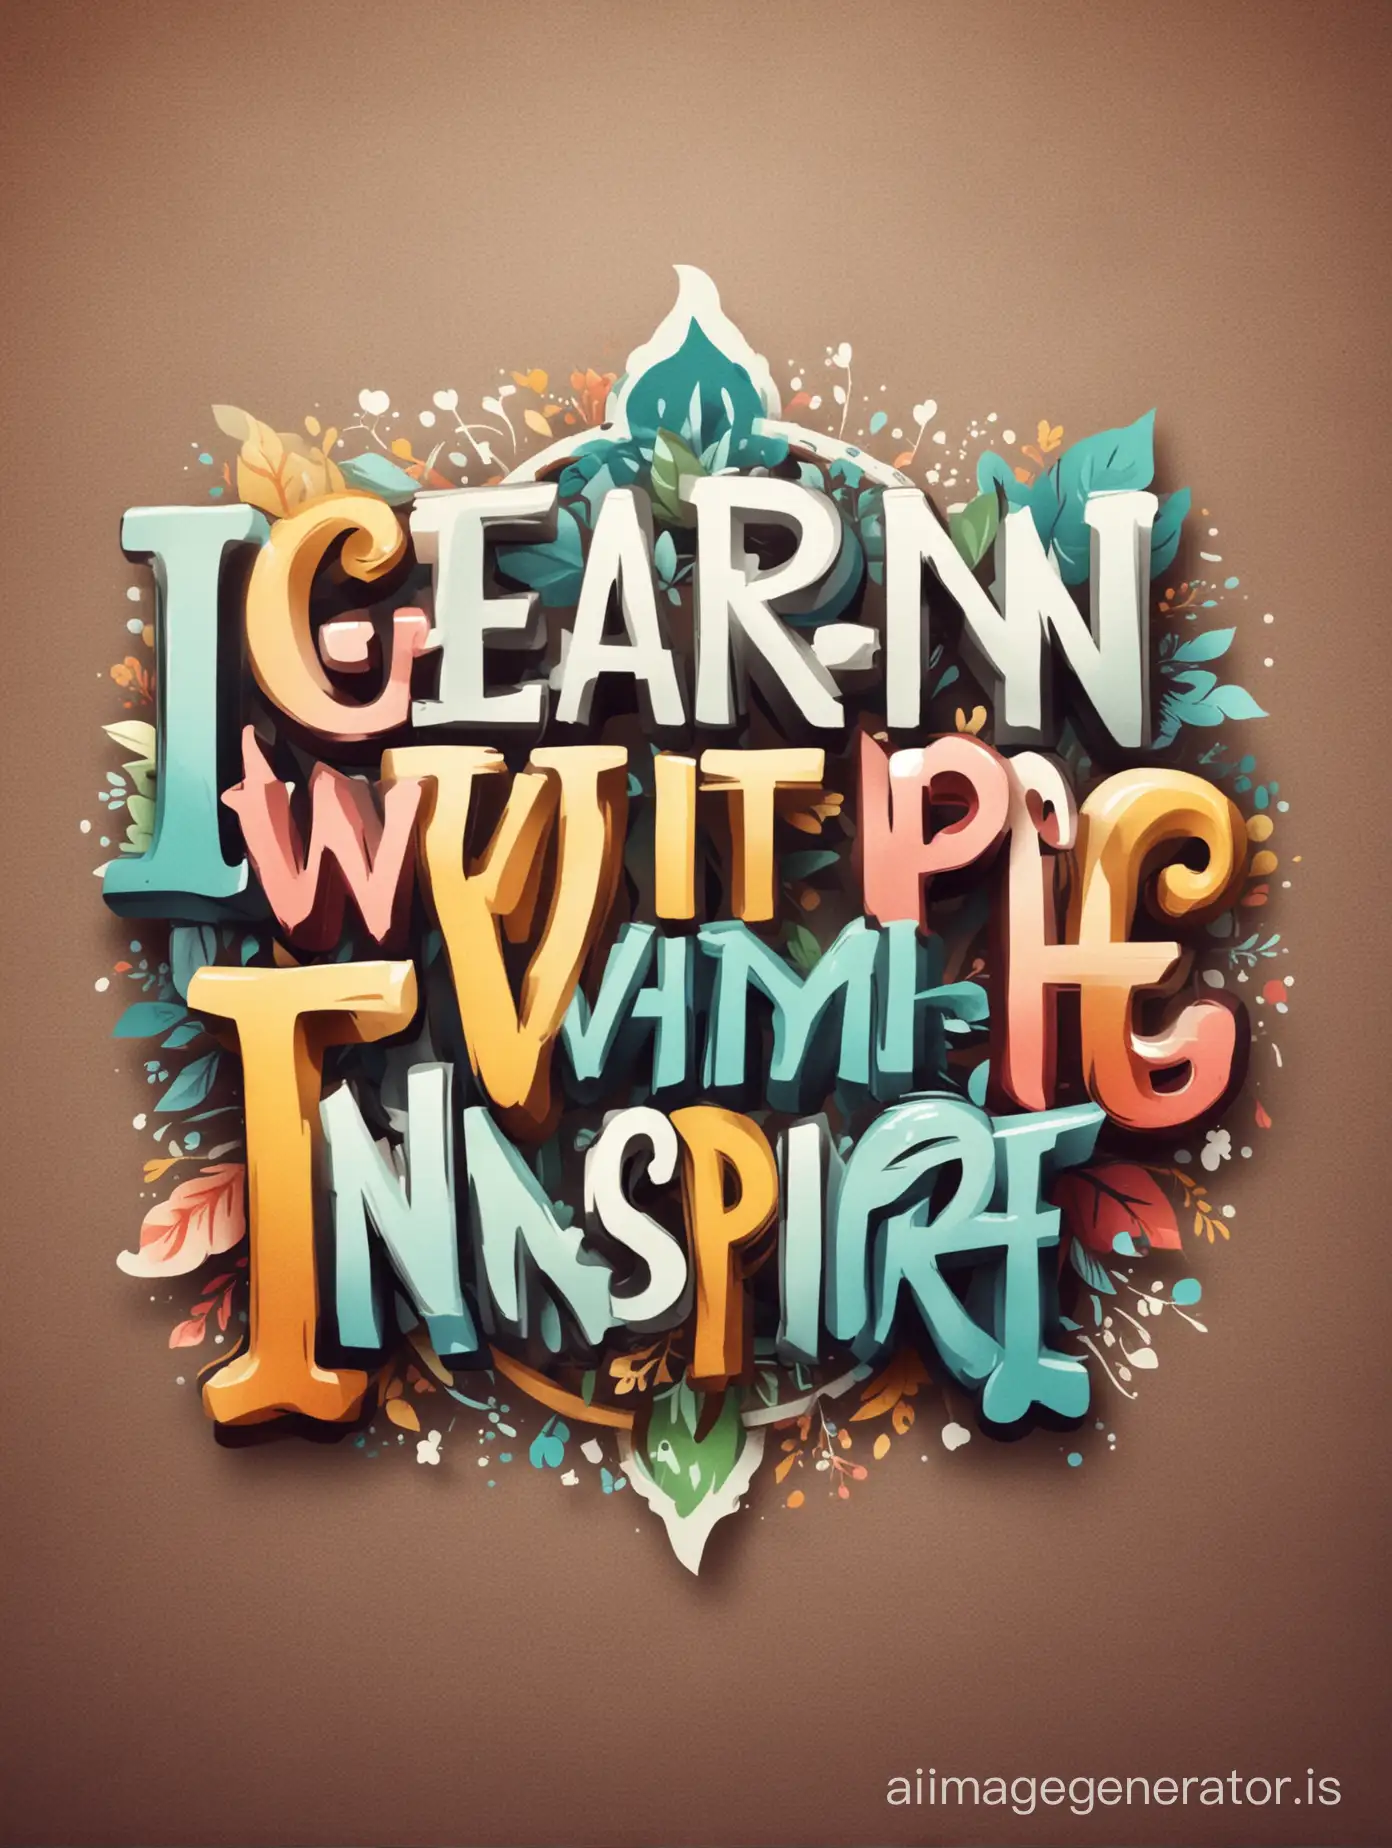 "LearnWithInspire" logo design with inspiring image background with unique font style and peace image